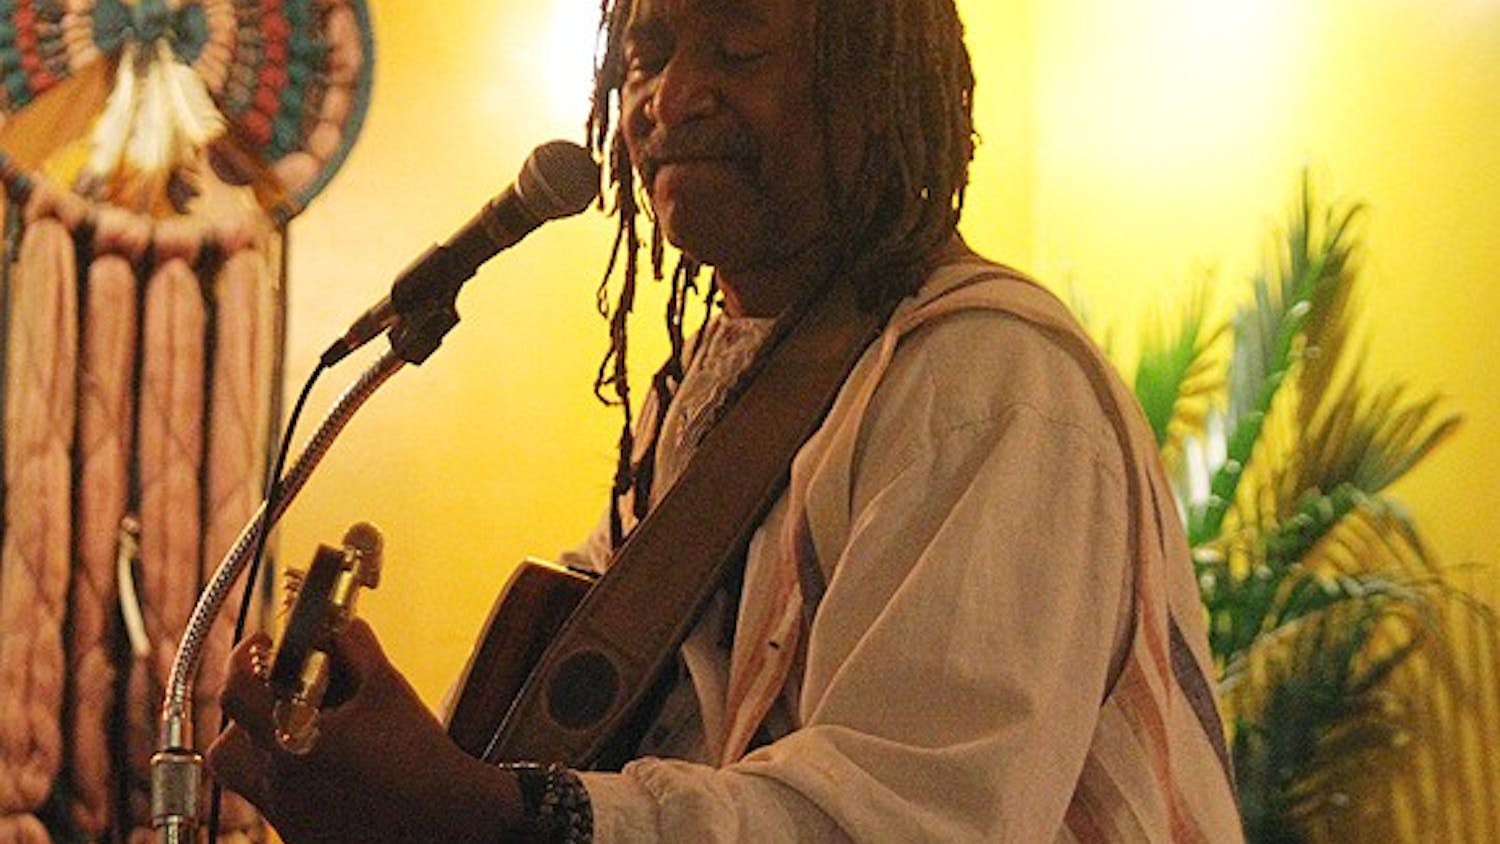 	Gregory Blaine plays reggae jazz and blues at Oasis coffee shop almost every weekend as a popular local musician.